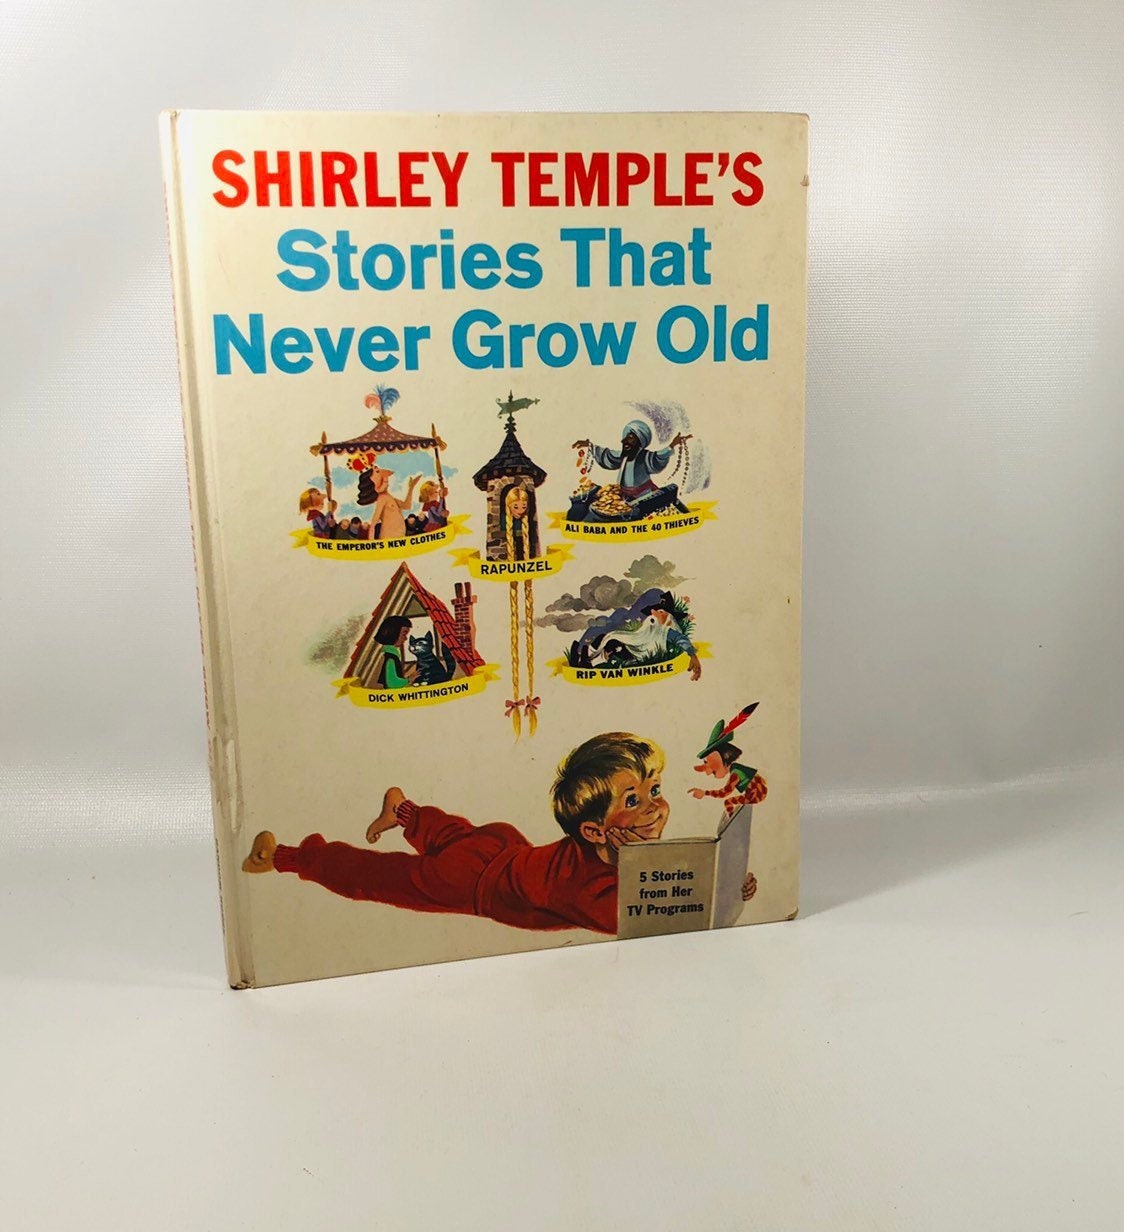 Shirley Temple's Stories that Never Grow Old 1958 A Vintage Children's BookVintage Book